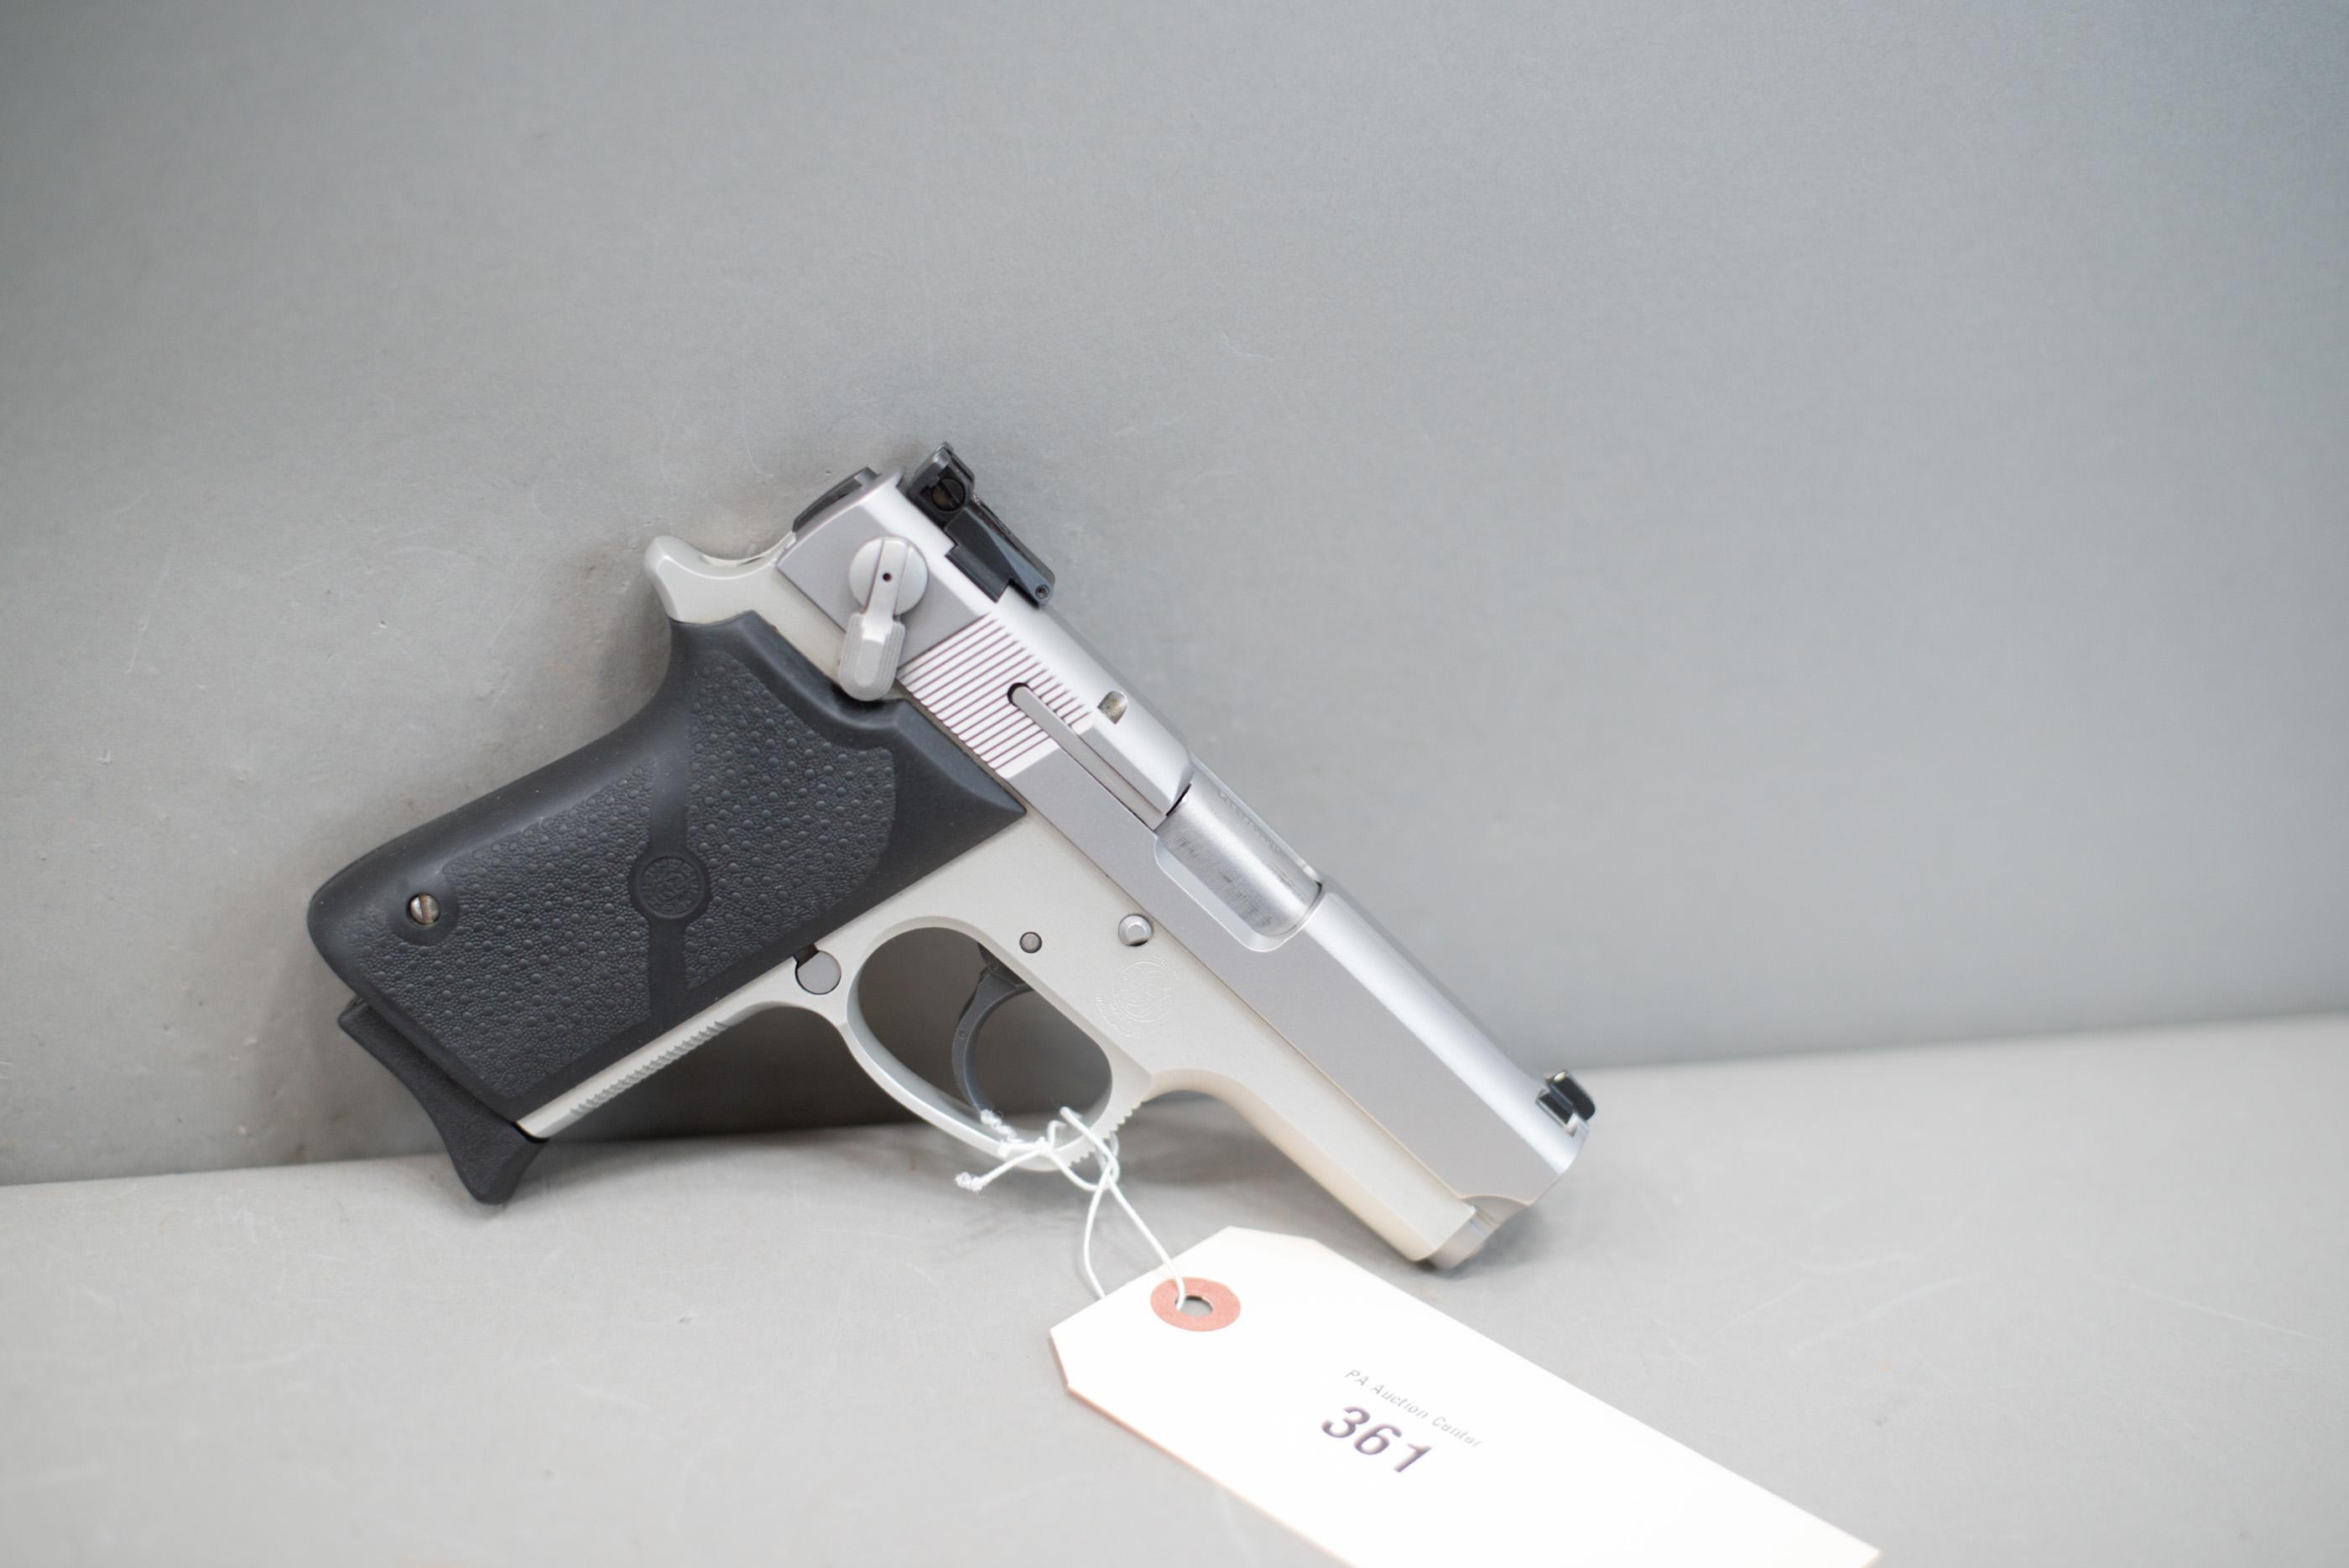 (R) Smith & Wesson Model 3913 9mm Pistol